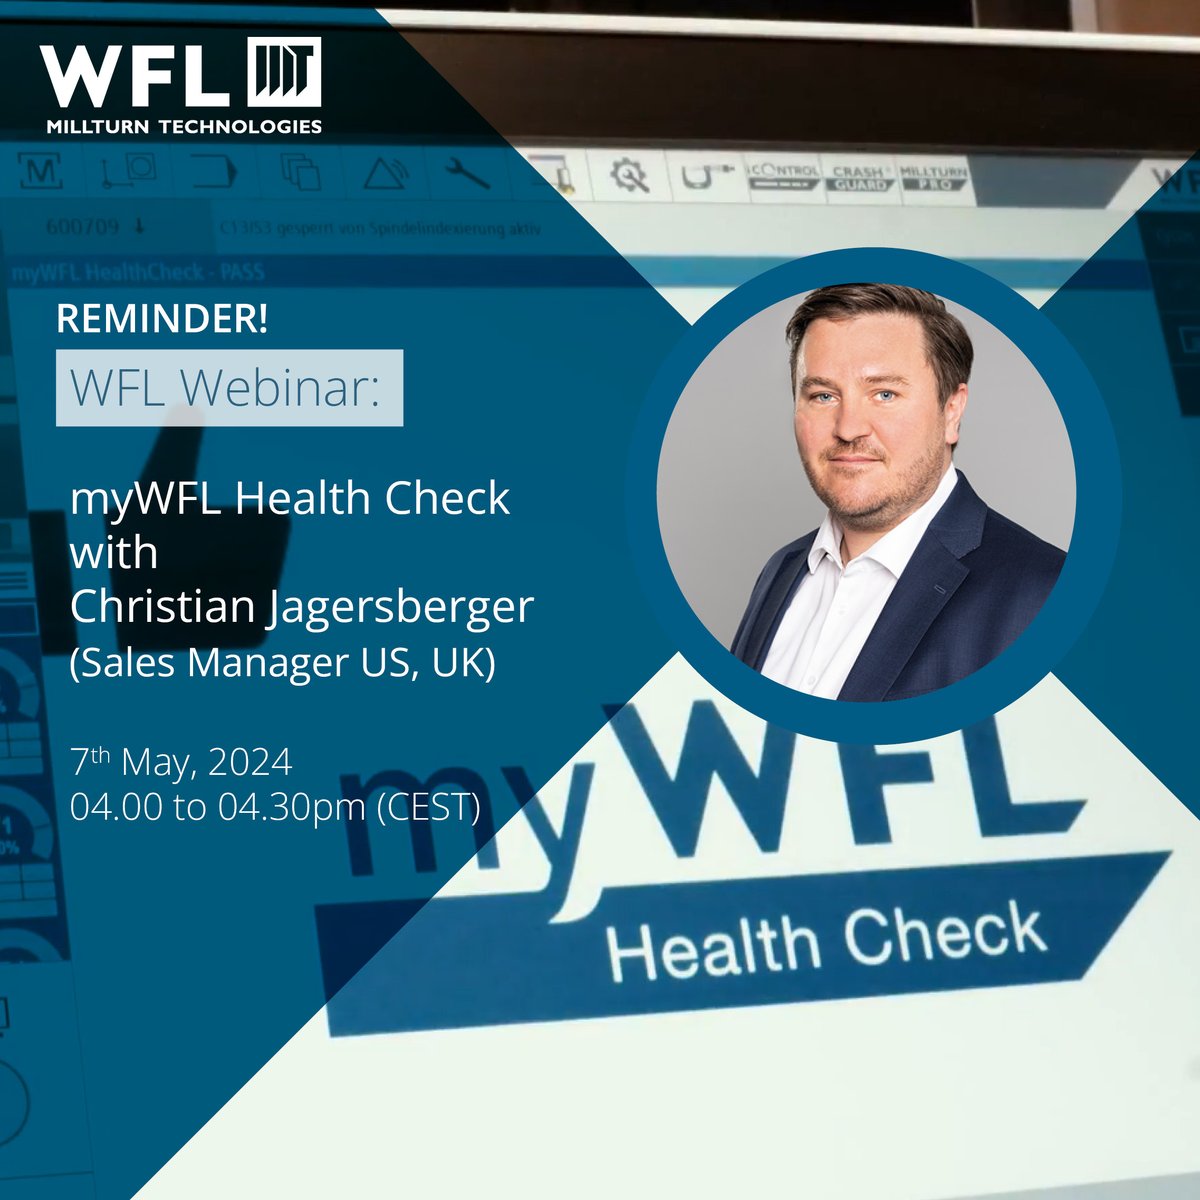 🔔REMINDER!🔔 Are you registered? Our webinar covers the most important points about the myWFL Health Check in just 20 minutes. Afterwards there is time for questions and answers. Register now here: ➡️ ow.ly/lYwV50RrYmA